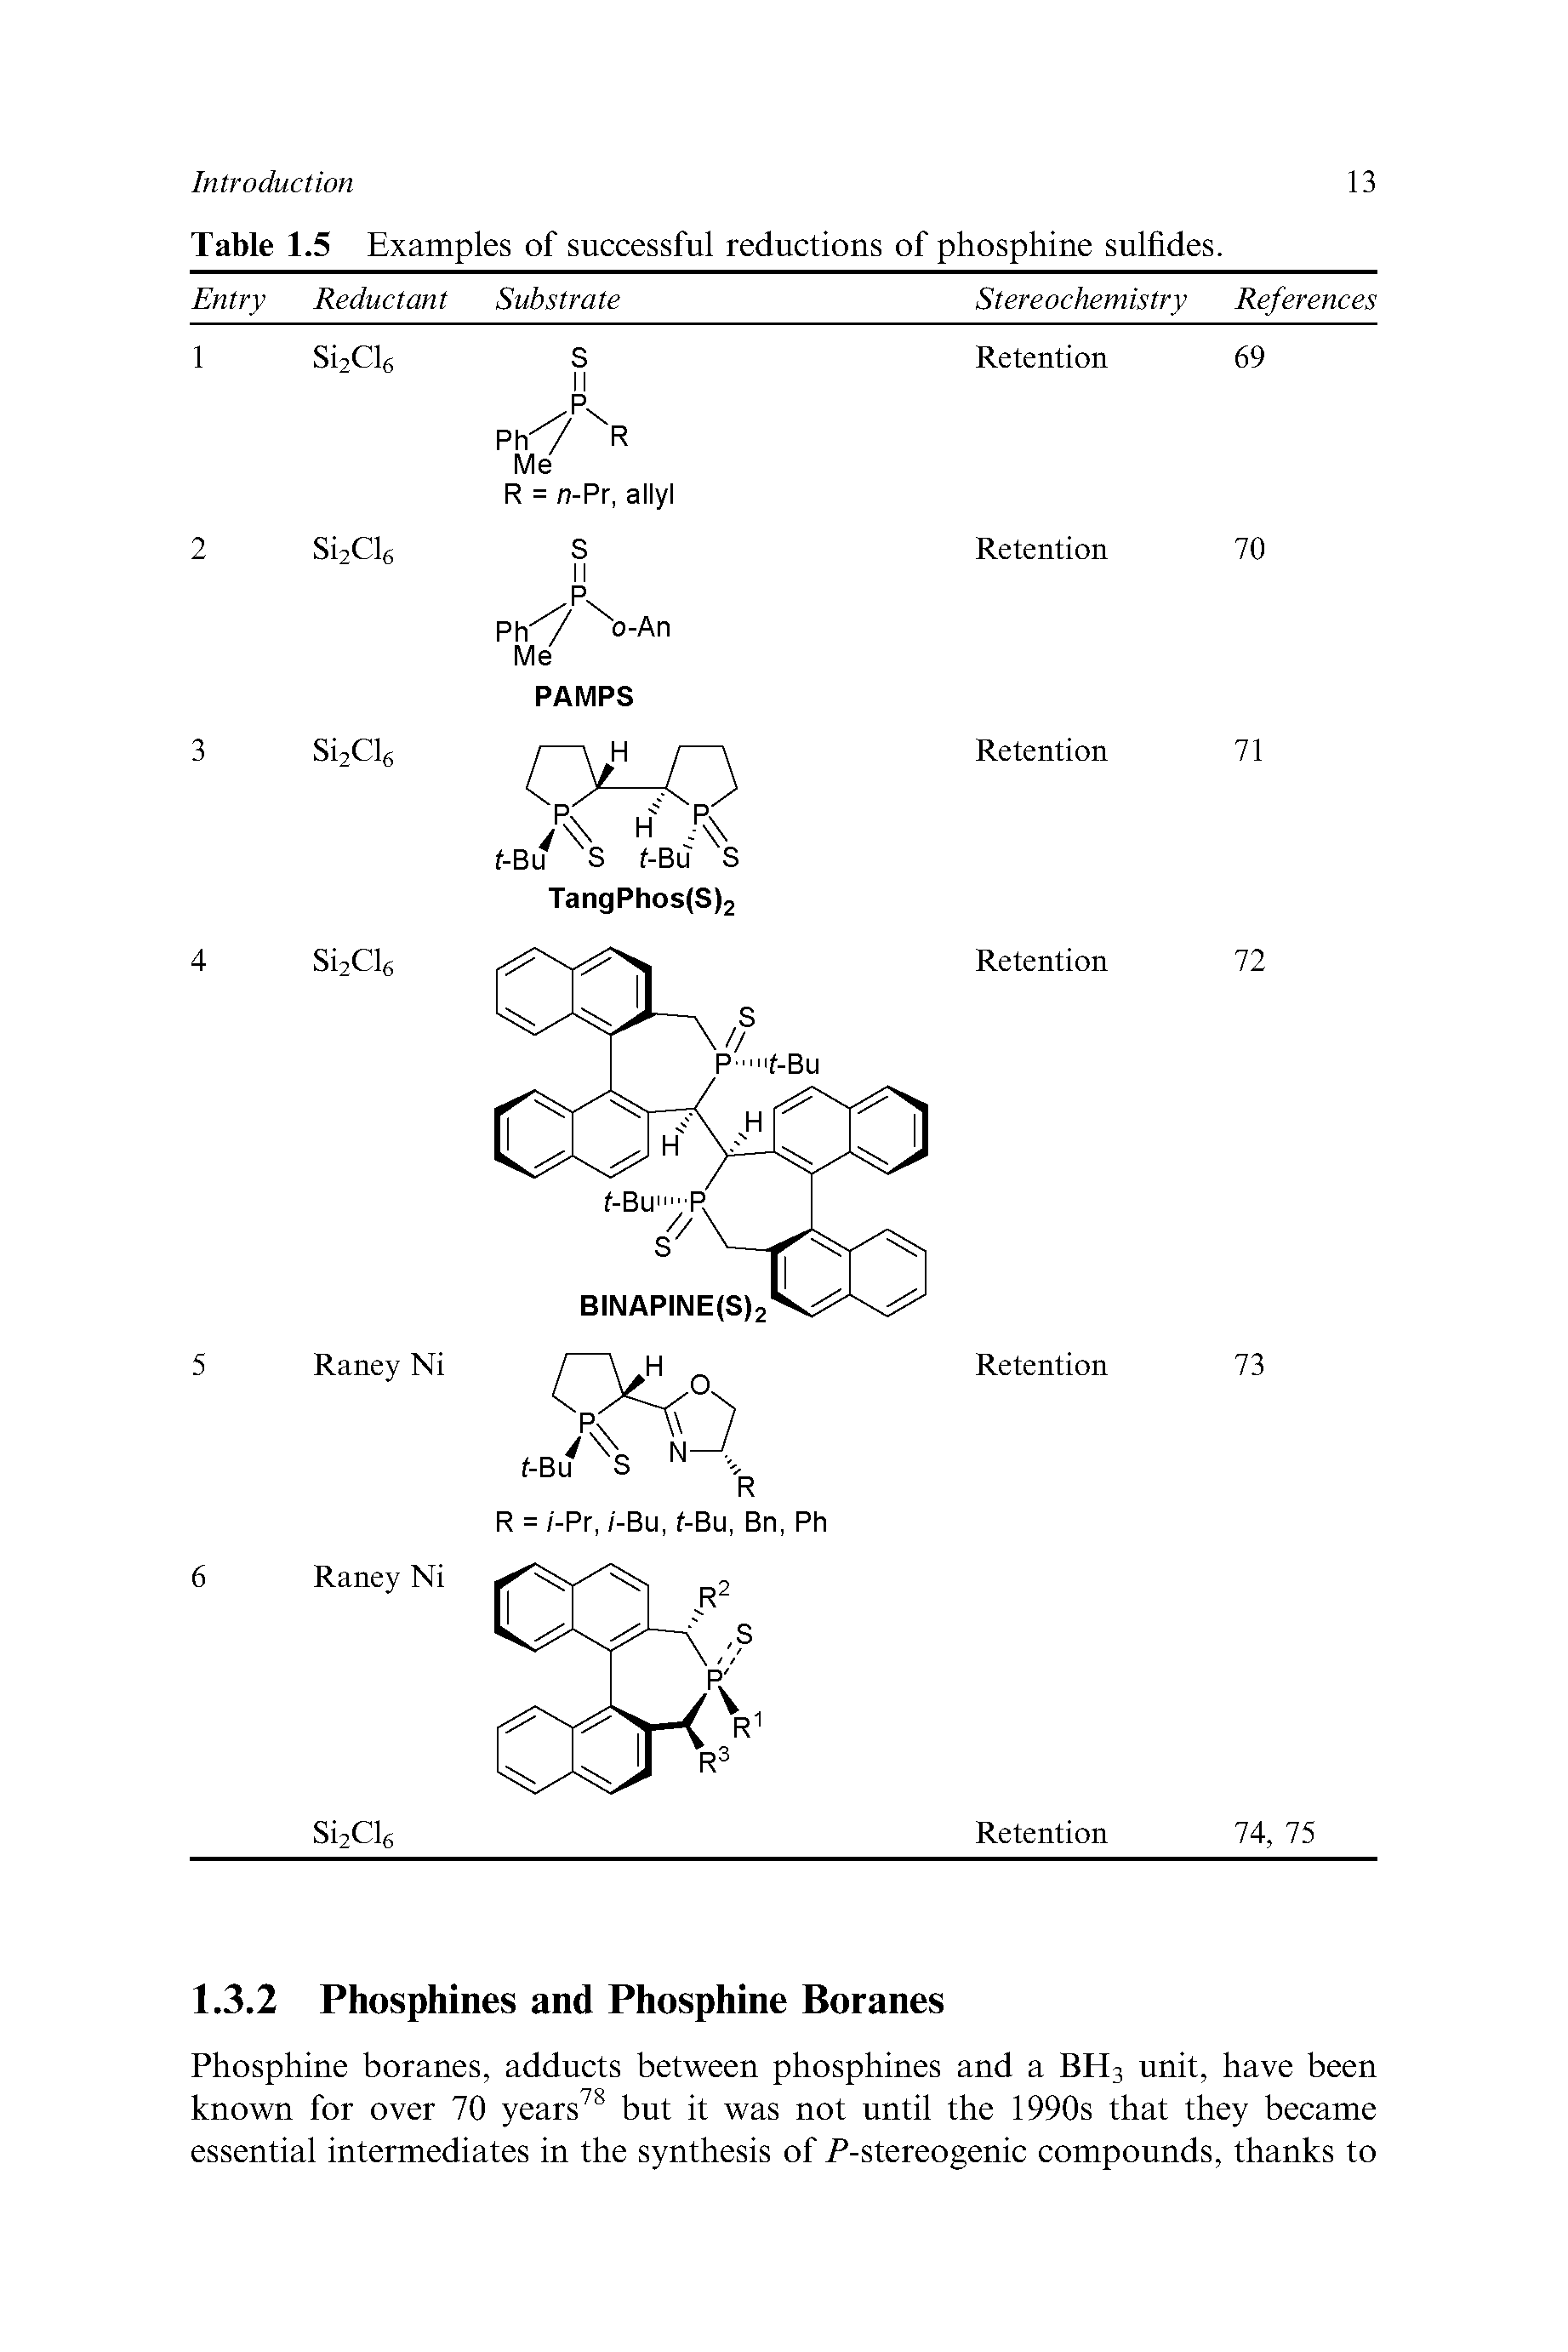 Table 1.5 Examples of successful reductions of phosphine sulfides.